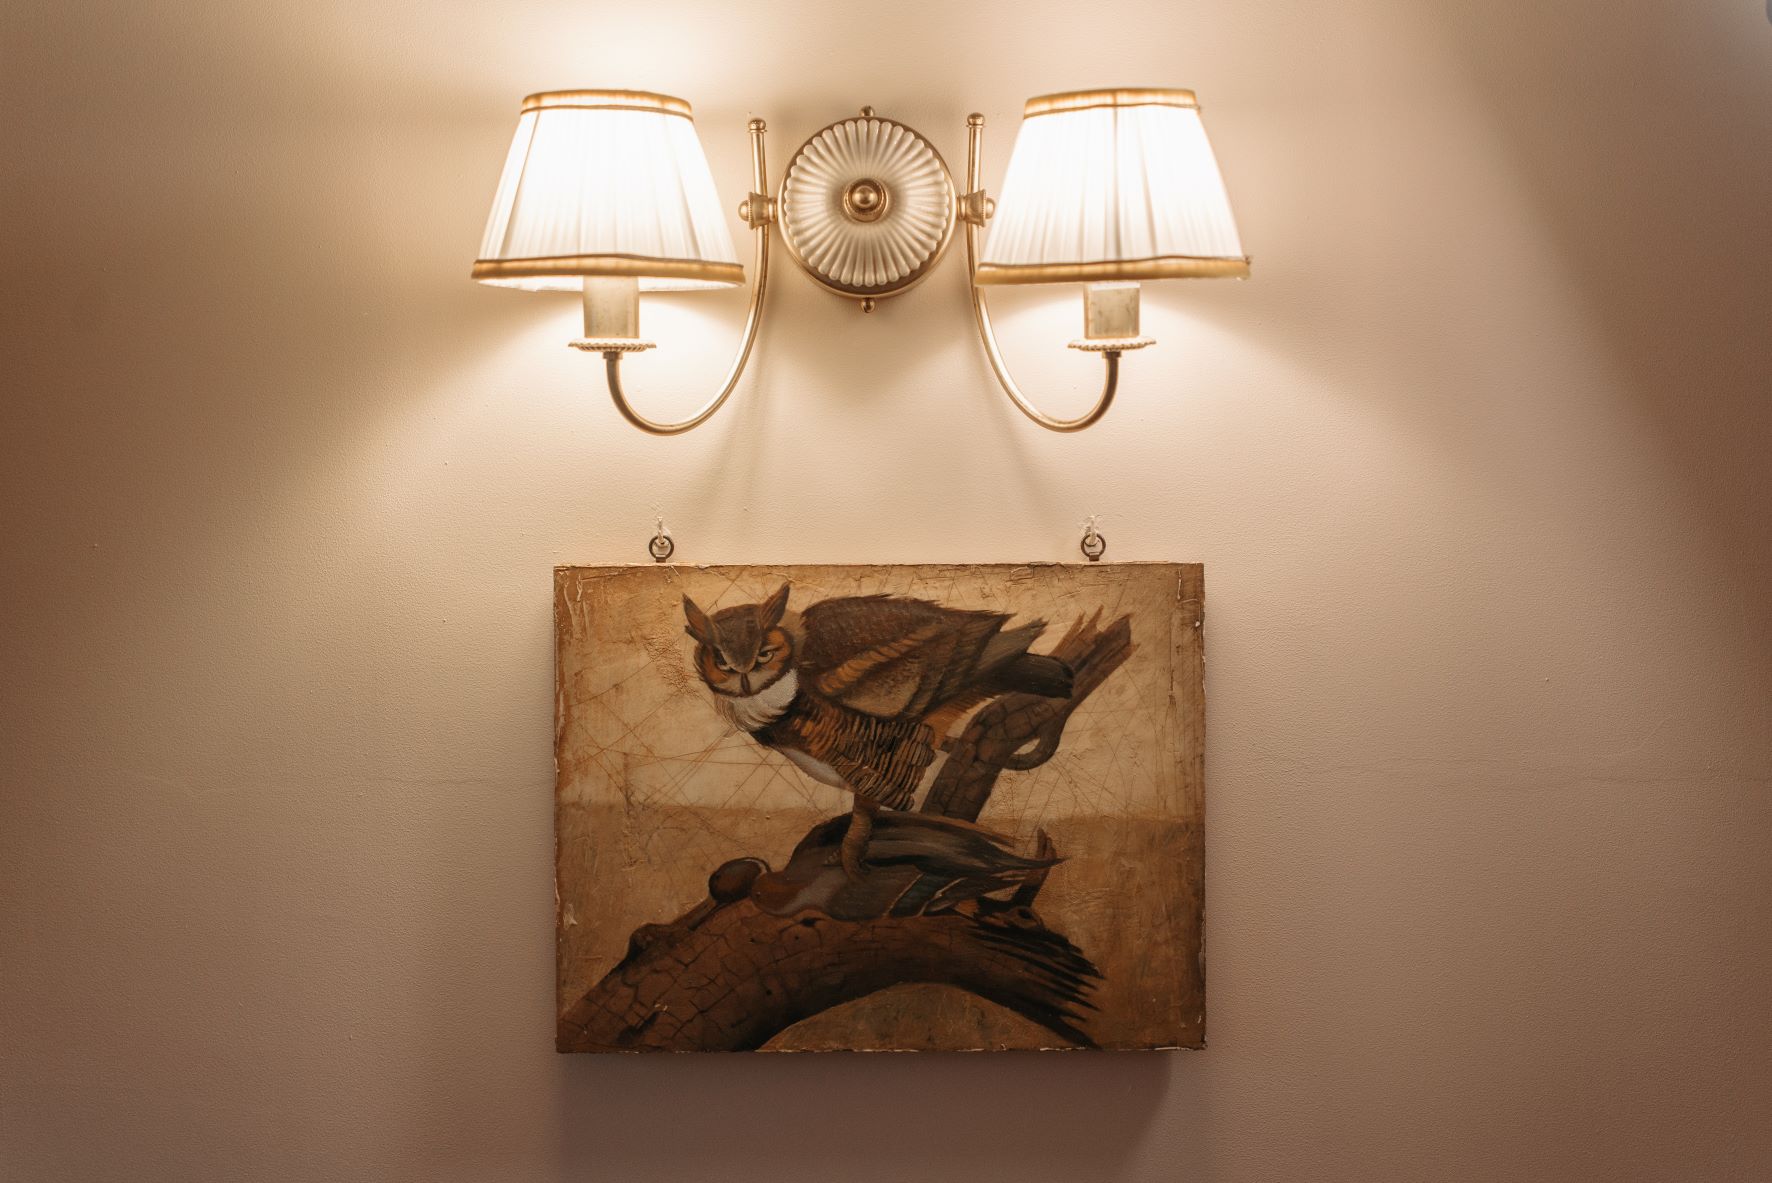 Enhance the lighting of your house with fancy wall lights